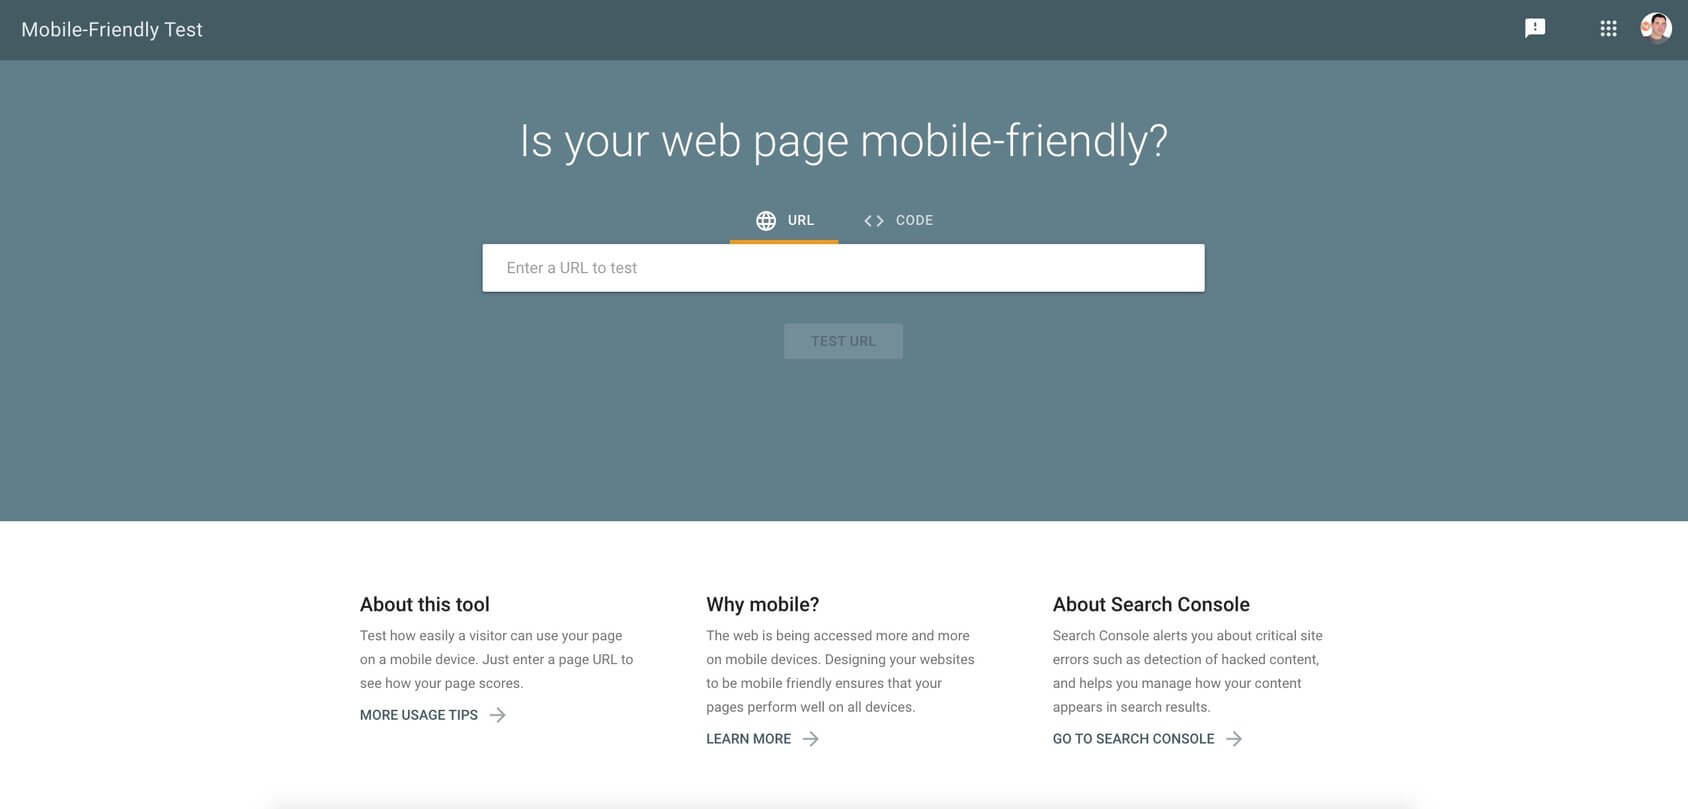 Google’s Mobile-Friendly homepage